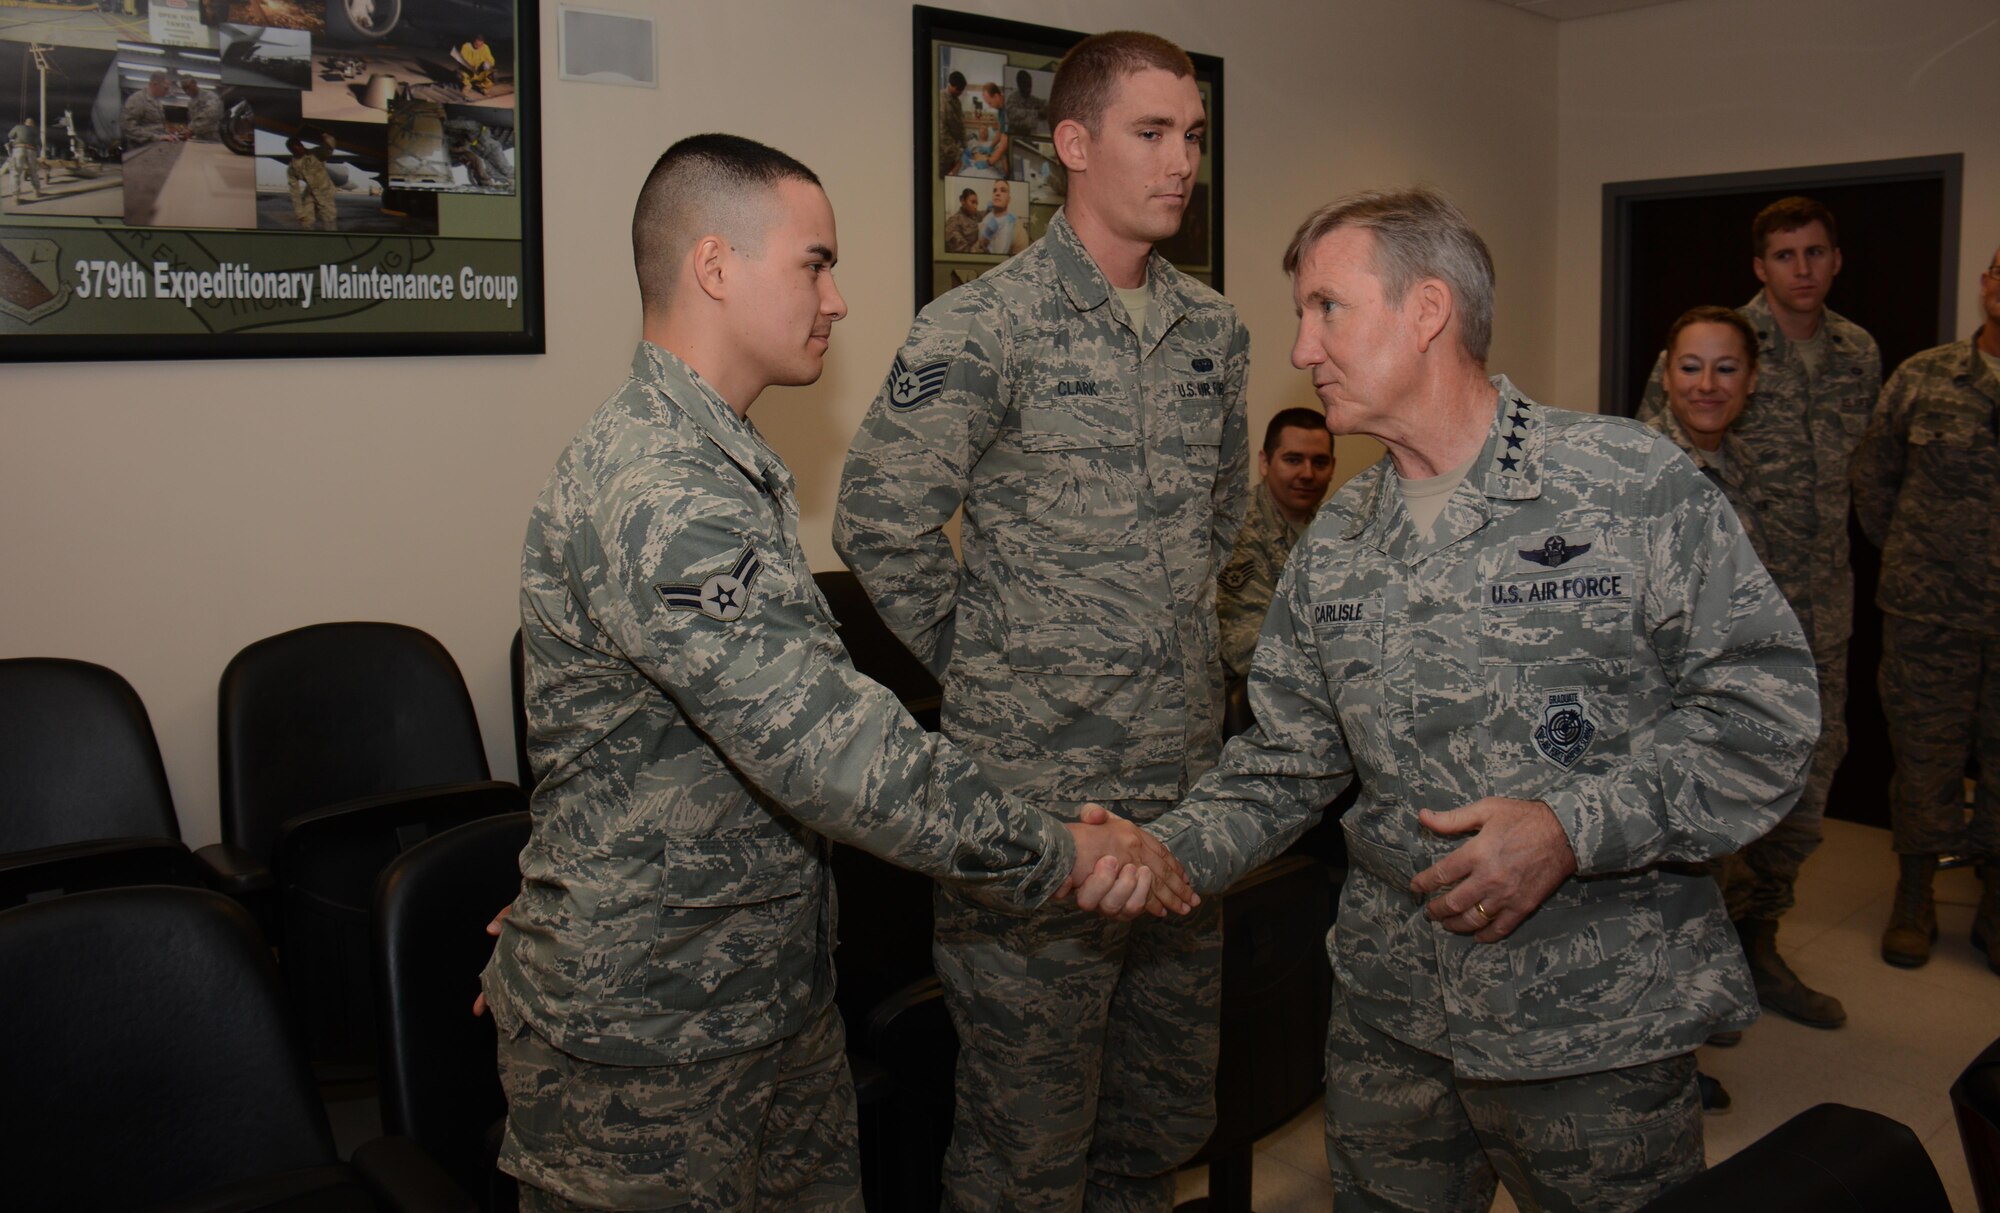 U.S. Air Force Gen. Hawk Carlisle, commander of Air Combat Command, presents a coin to Airman 1st Class John Belcher, 379th Expeditionary Communications Squadron, for outstanding performance inside the Wing Operations Center at Al Udeid Air Base, Qatar Oct. 21, 2015. During his visit, Carlisle also received a 379th Air Expeditionary Wing mission briefing and hosted an all-call event with more than 300 members of AUAB. (U.S. Air Force photo by Tech. Sgt. James Hodgman/Released)